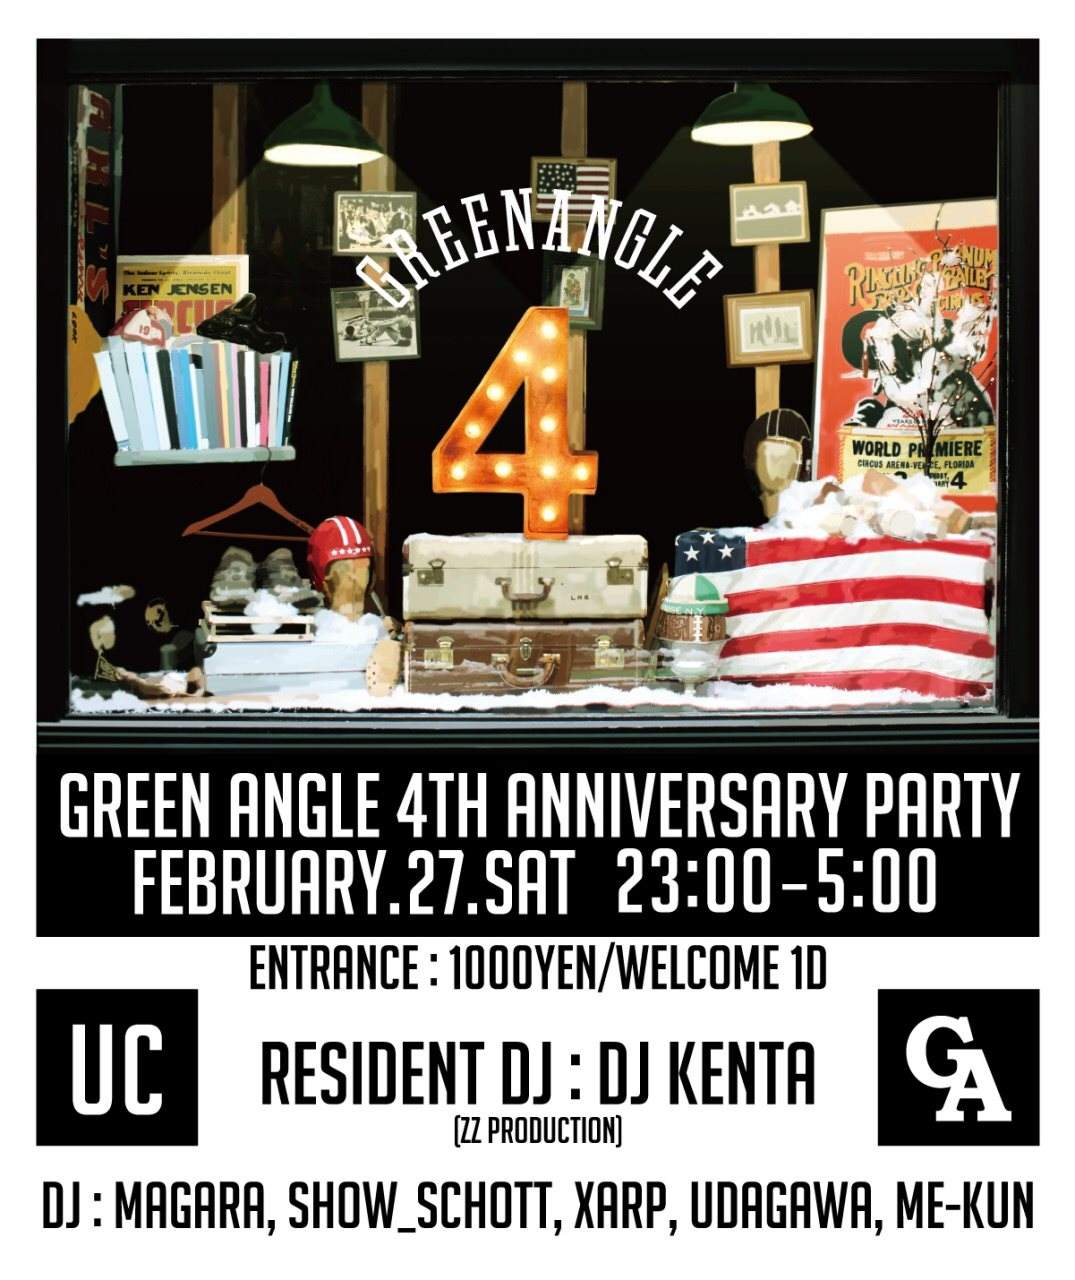 Green Angle 4th Anniversary Party - フライヤー表